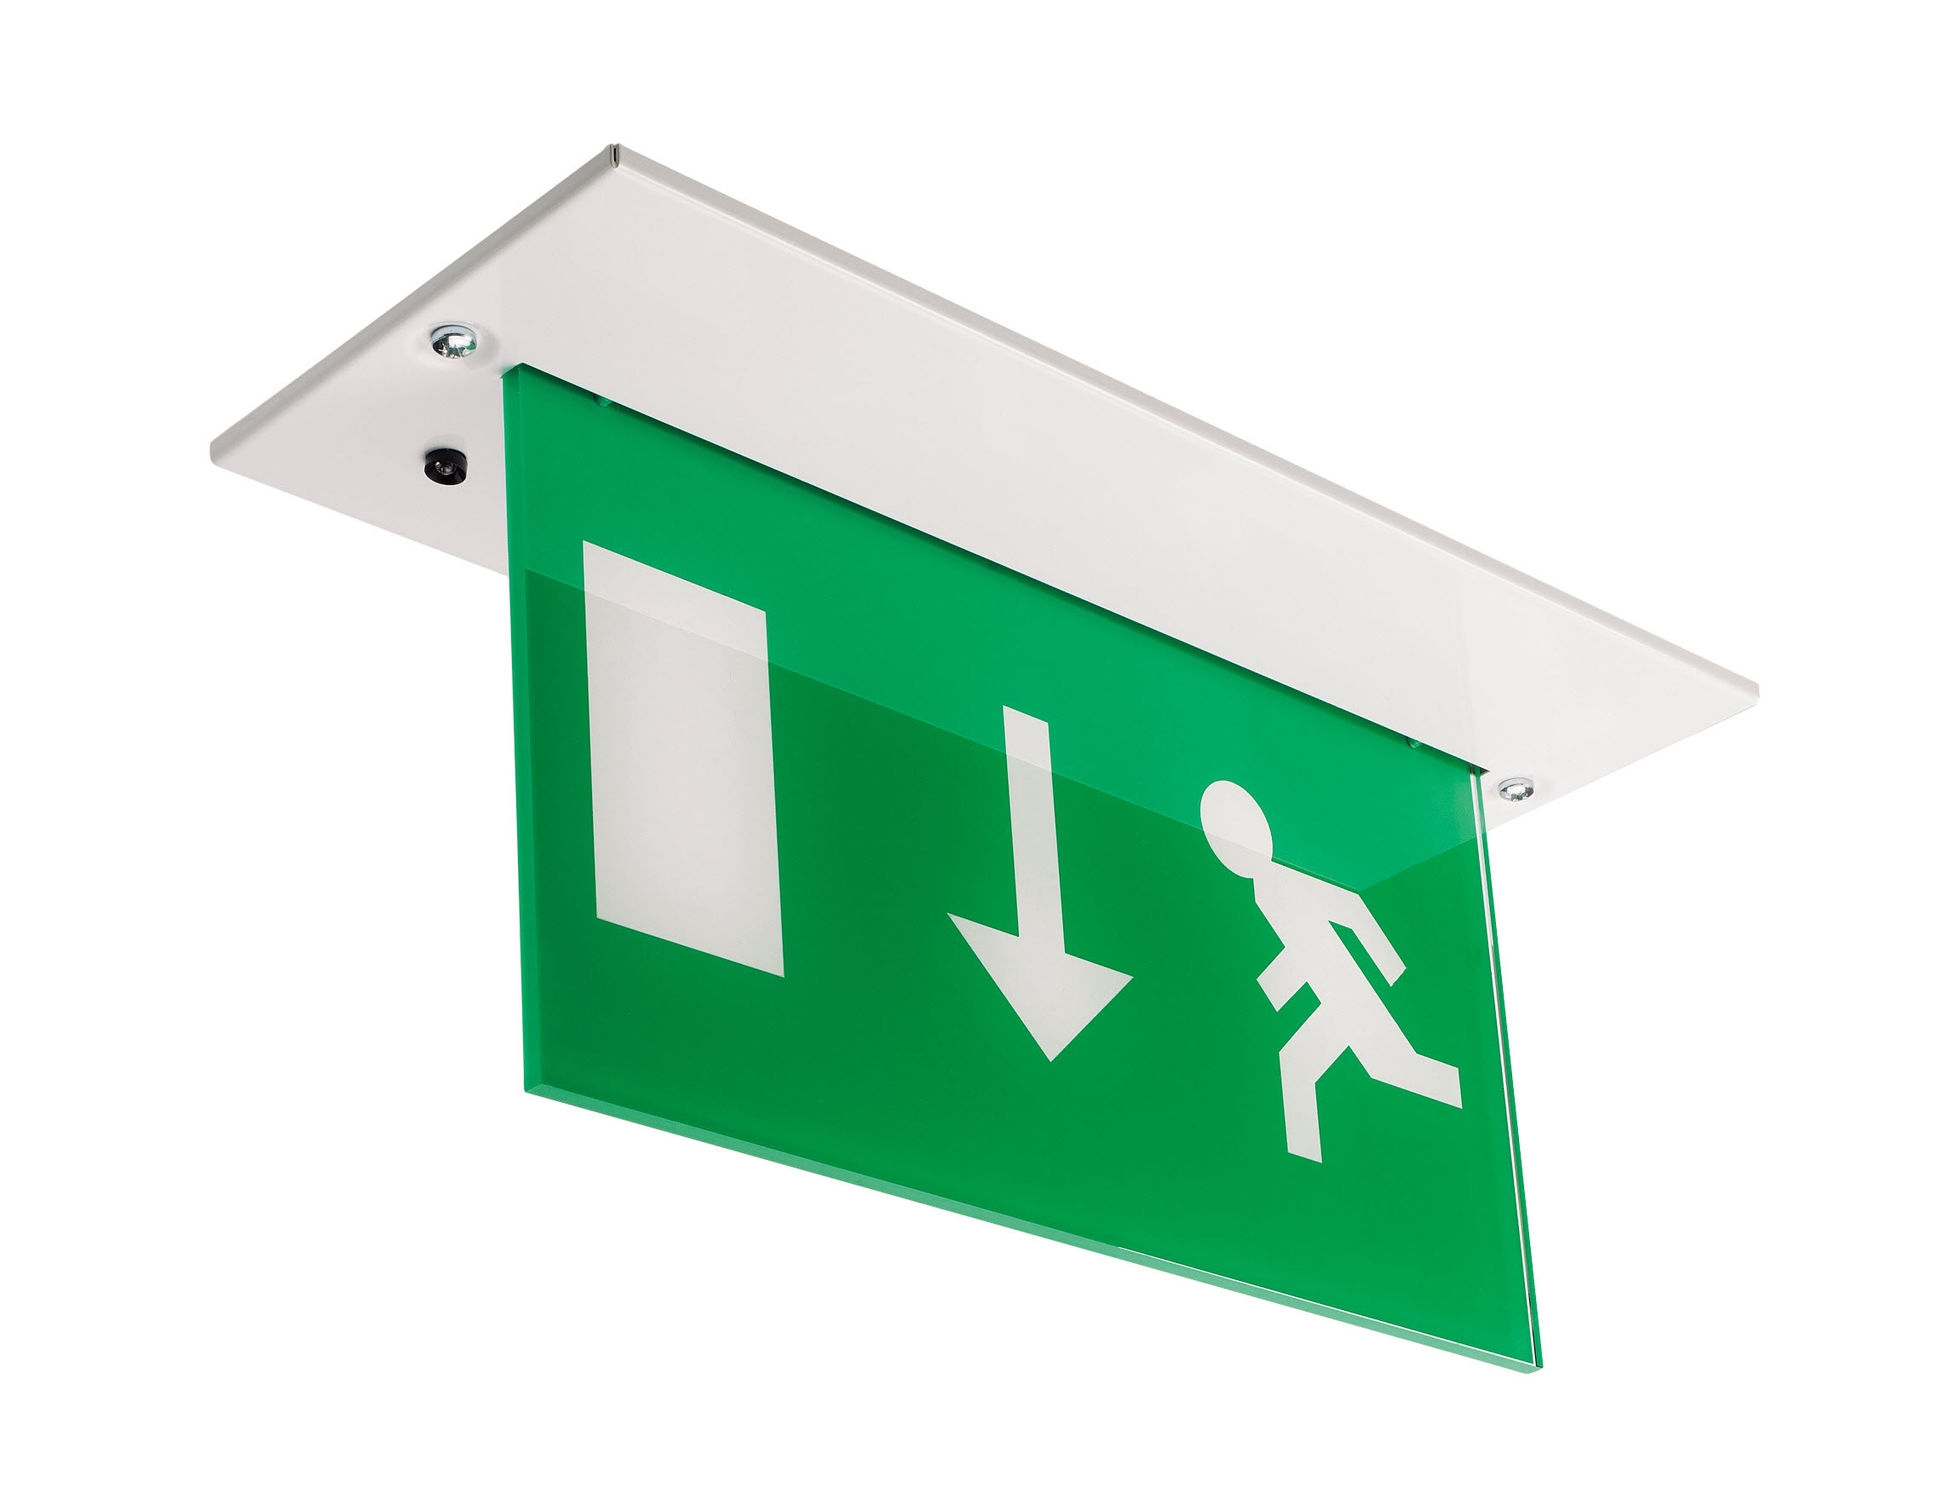 Ceiling Mounted Emergency Exit Lights